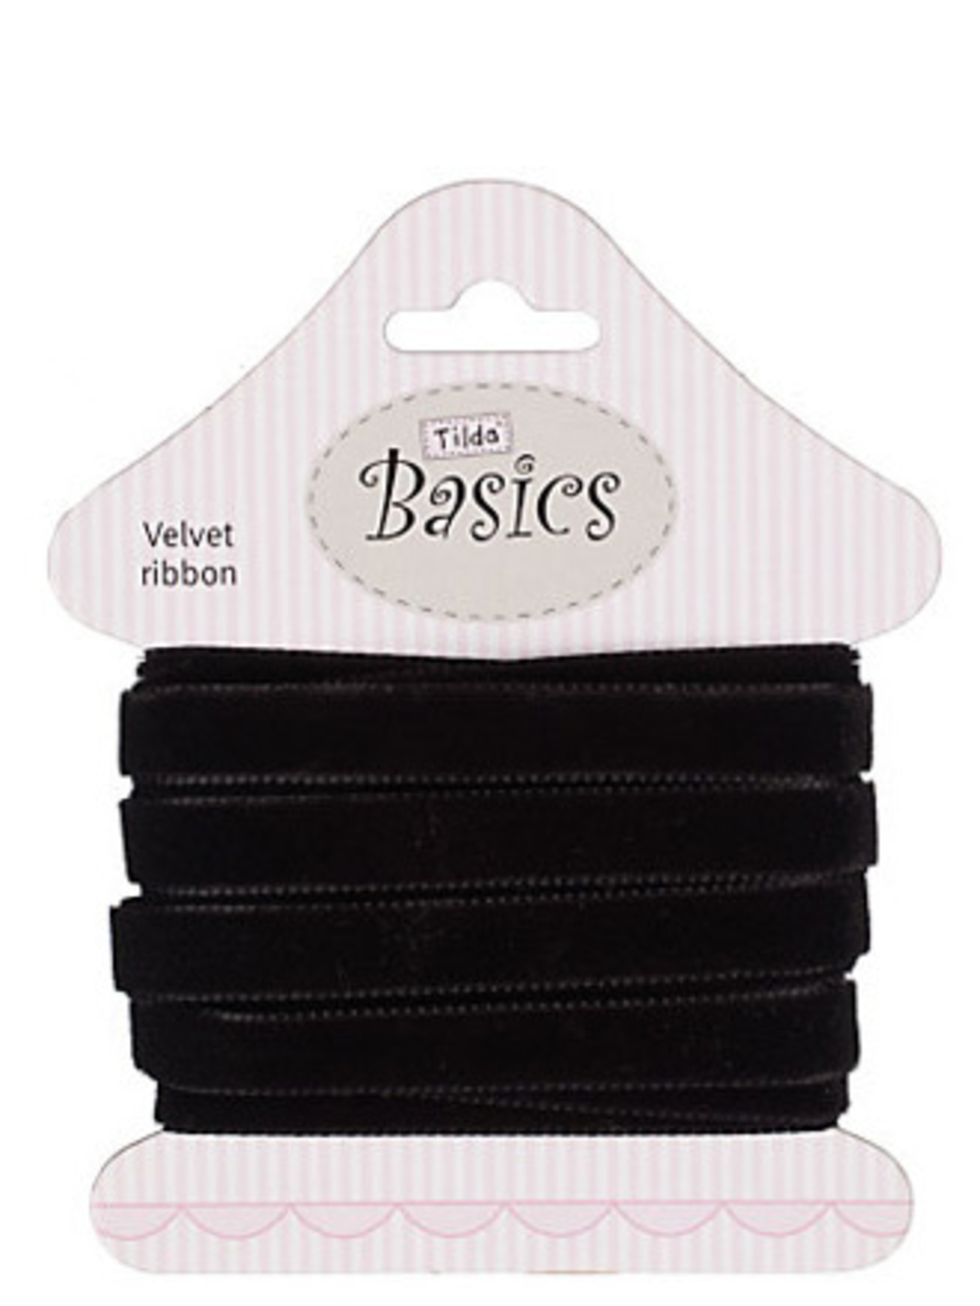 <p>At Valentino low ponytails were adorned with velvet ribbon moonlighting as hair bands. Bag yours from John Lewiss haberdashery department.</p><p>Tilda Velvet Ribbon, £4 at <a href="http://www.johnlewis.com/231249300/Product.aspx">John Lewis</a></p>